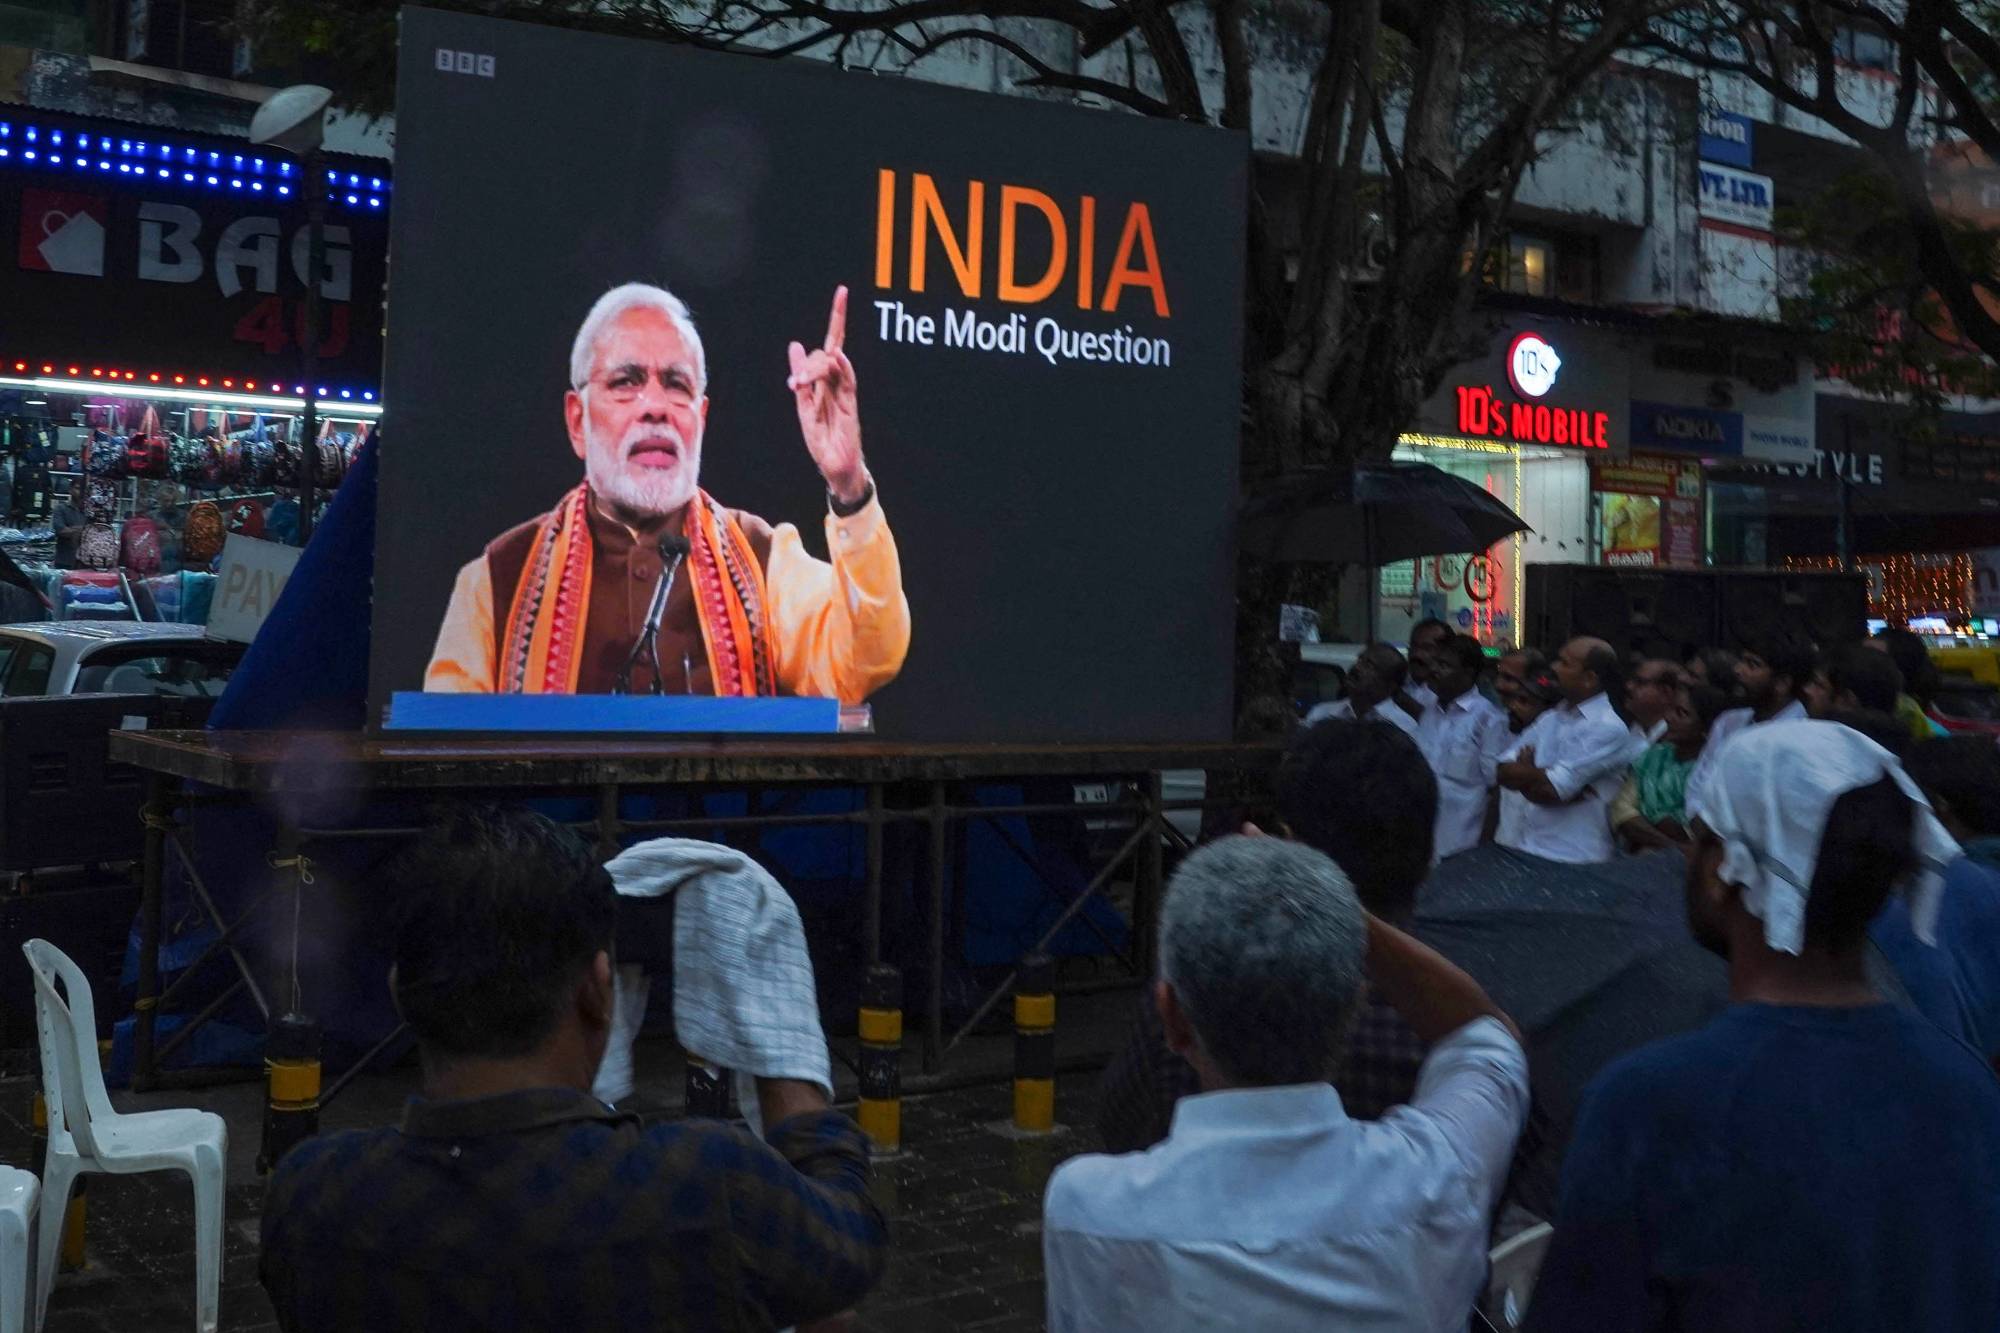 People watch the BBC documentary 'India: The Modi Question' in the city of Kochi, India, on Jan. 24. The documentary examines Prime Minister Narendra Modi's role during deadly 2002 sectarian riots.  | (PHOTO BY ARUN CHANDRABOSE / AFP)